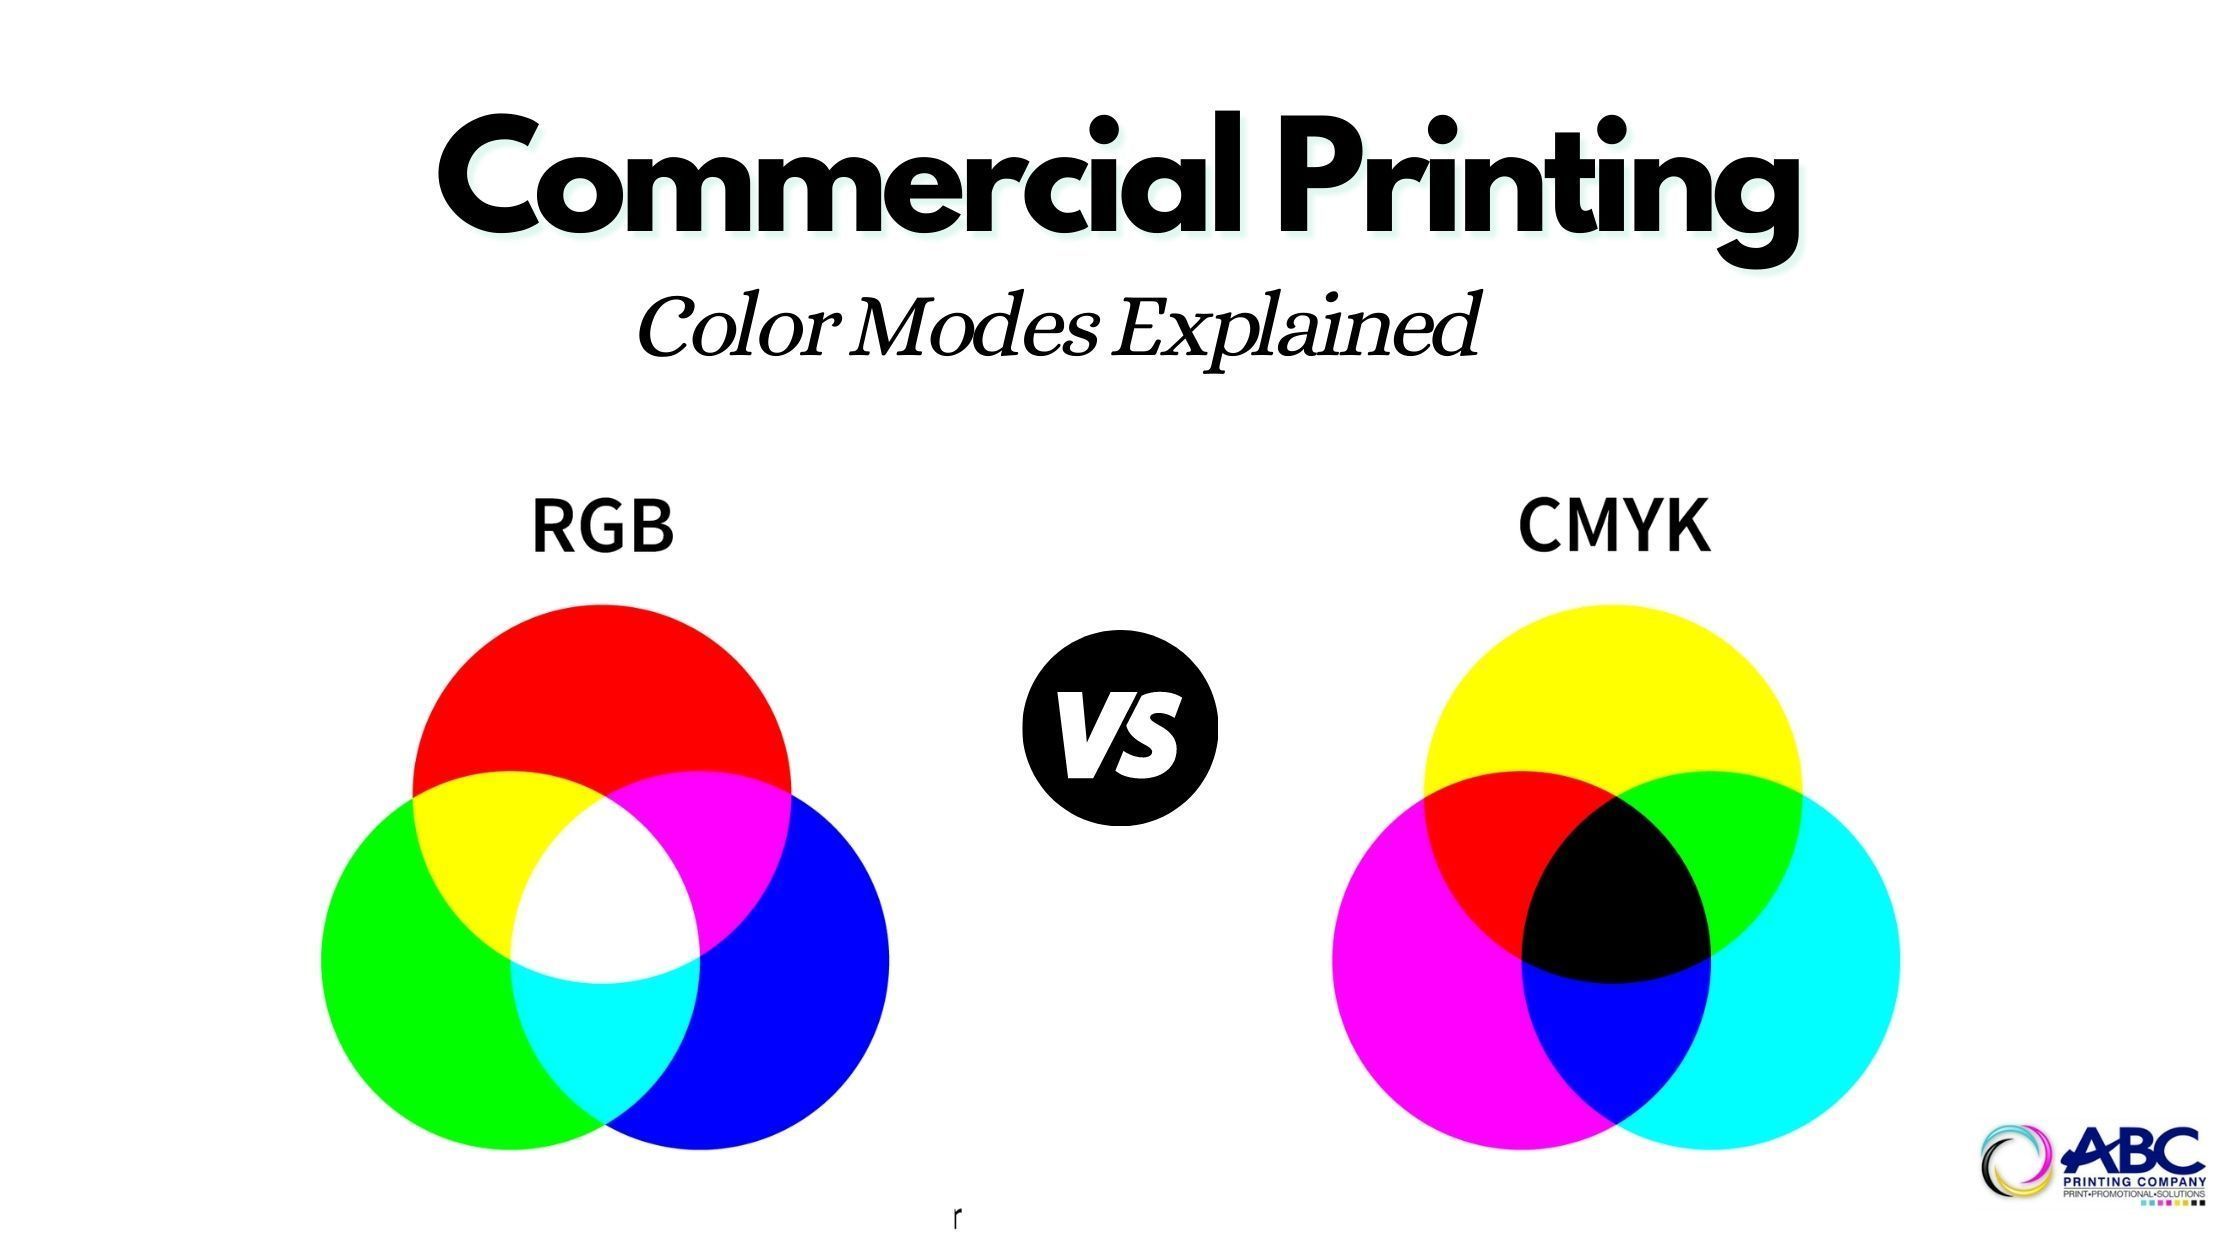 Commercial Printing Color Modes Explained